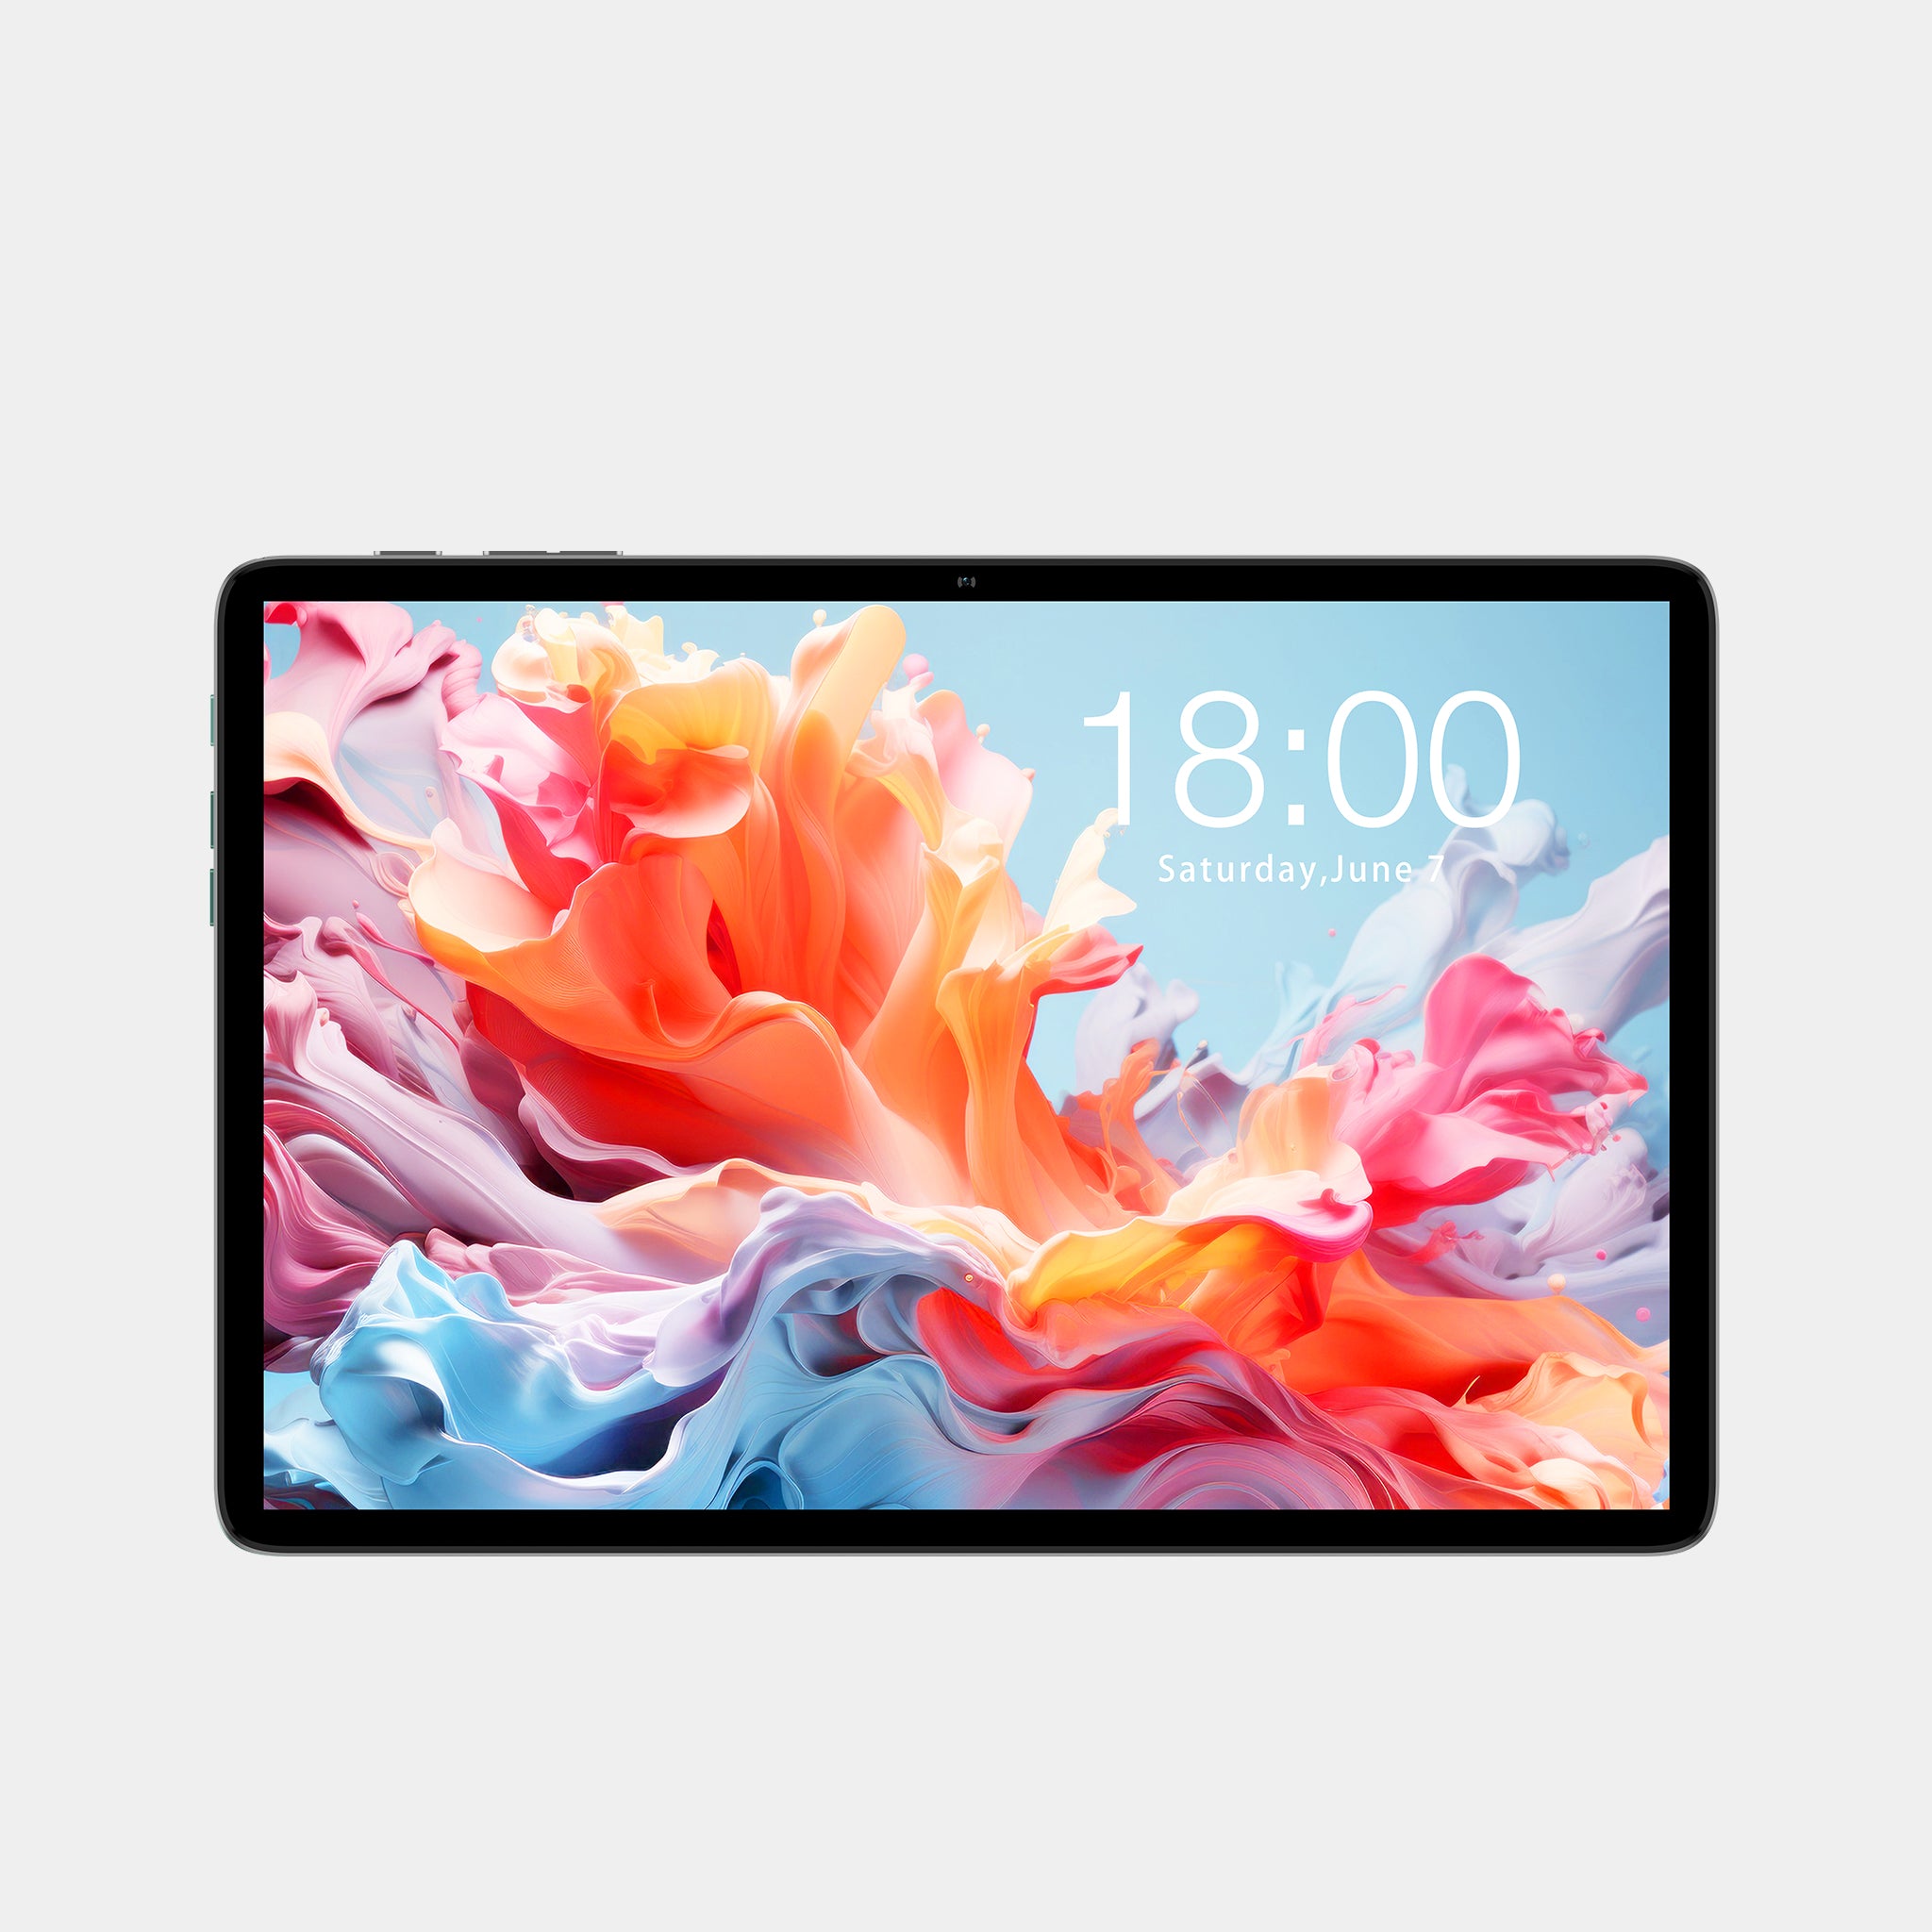 Teclast T60 Tab Launched In India? 